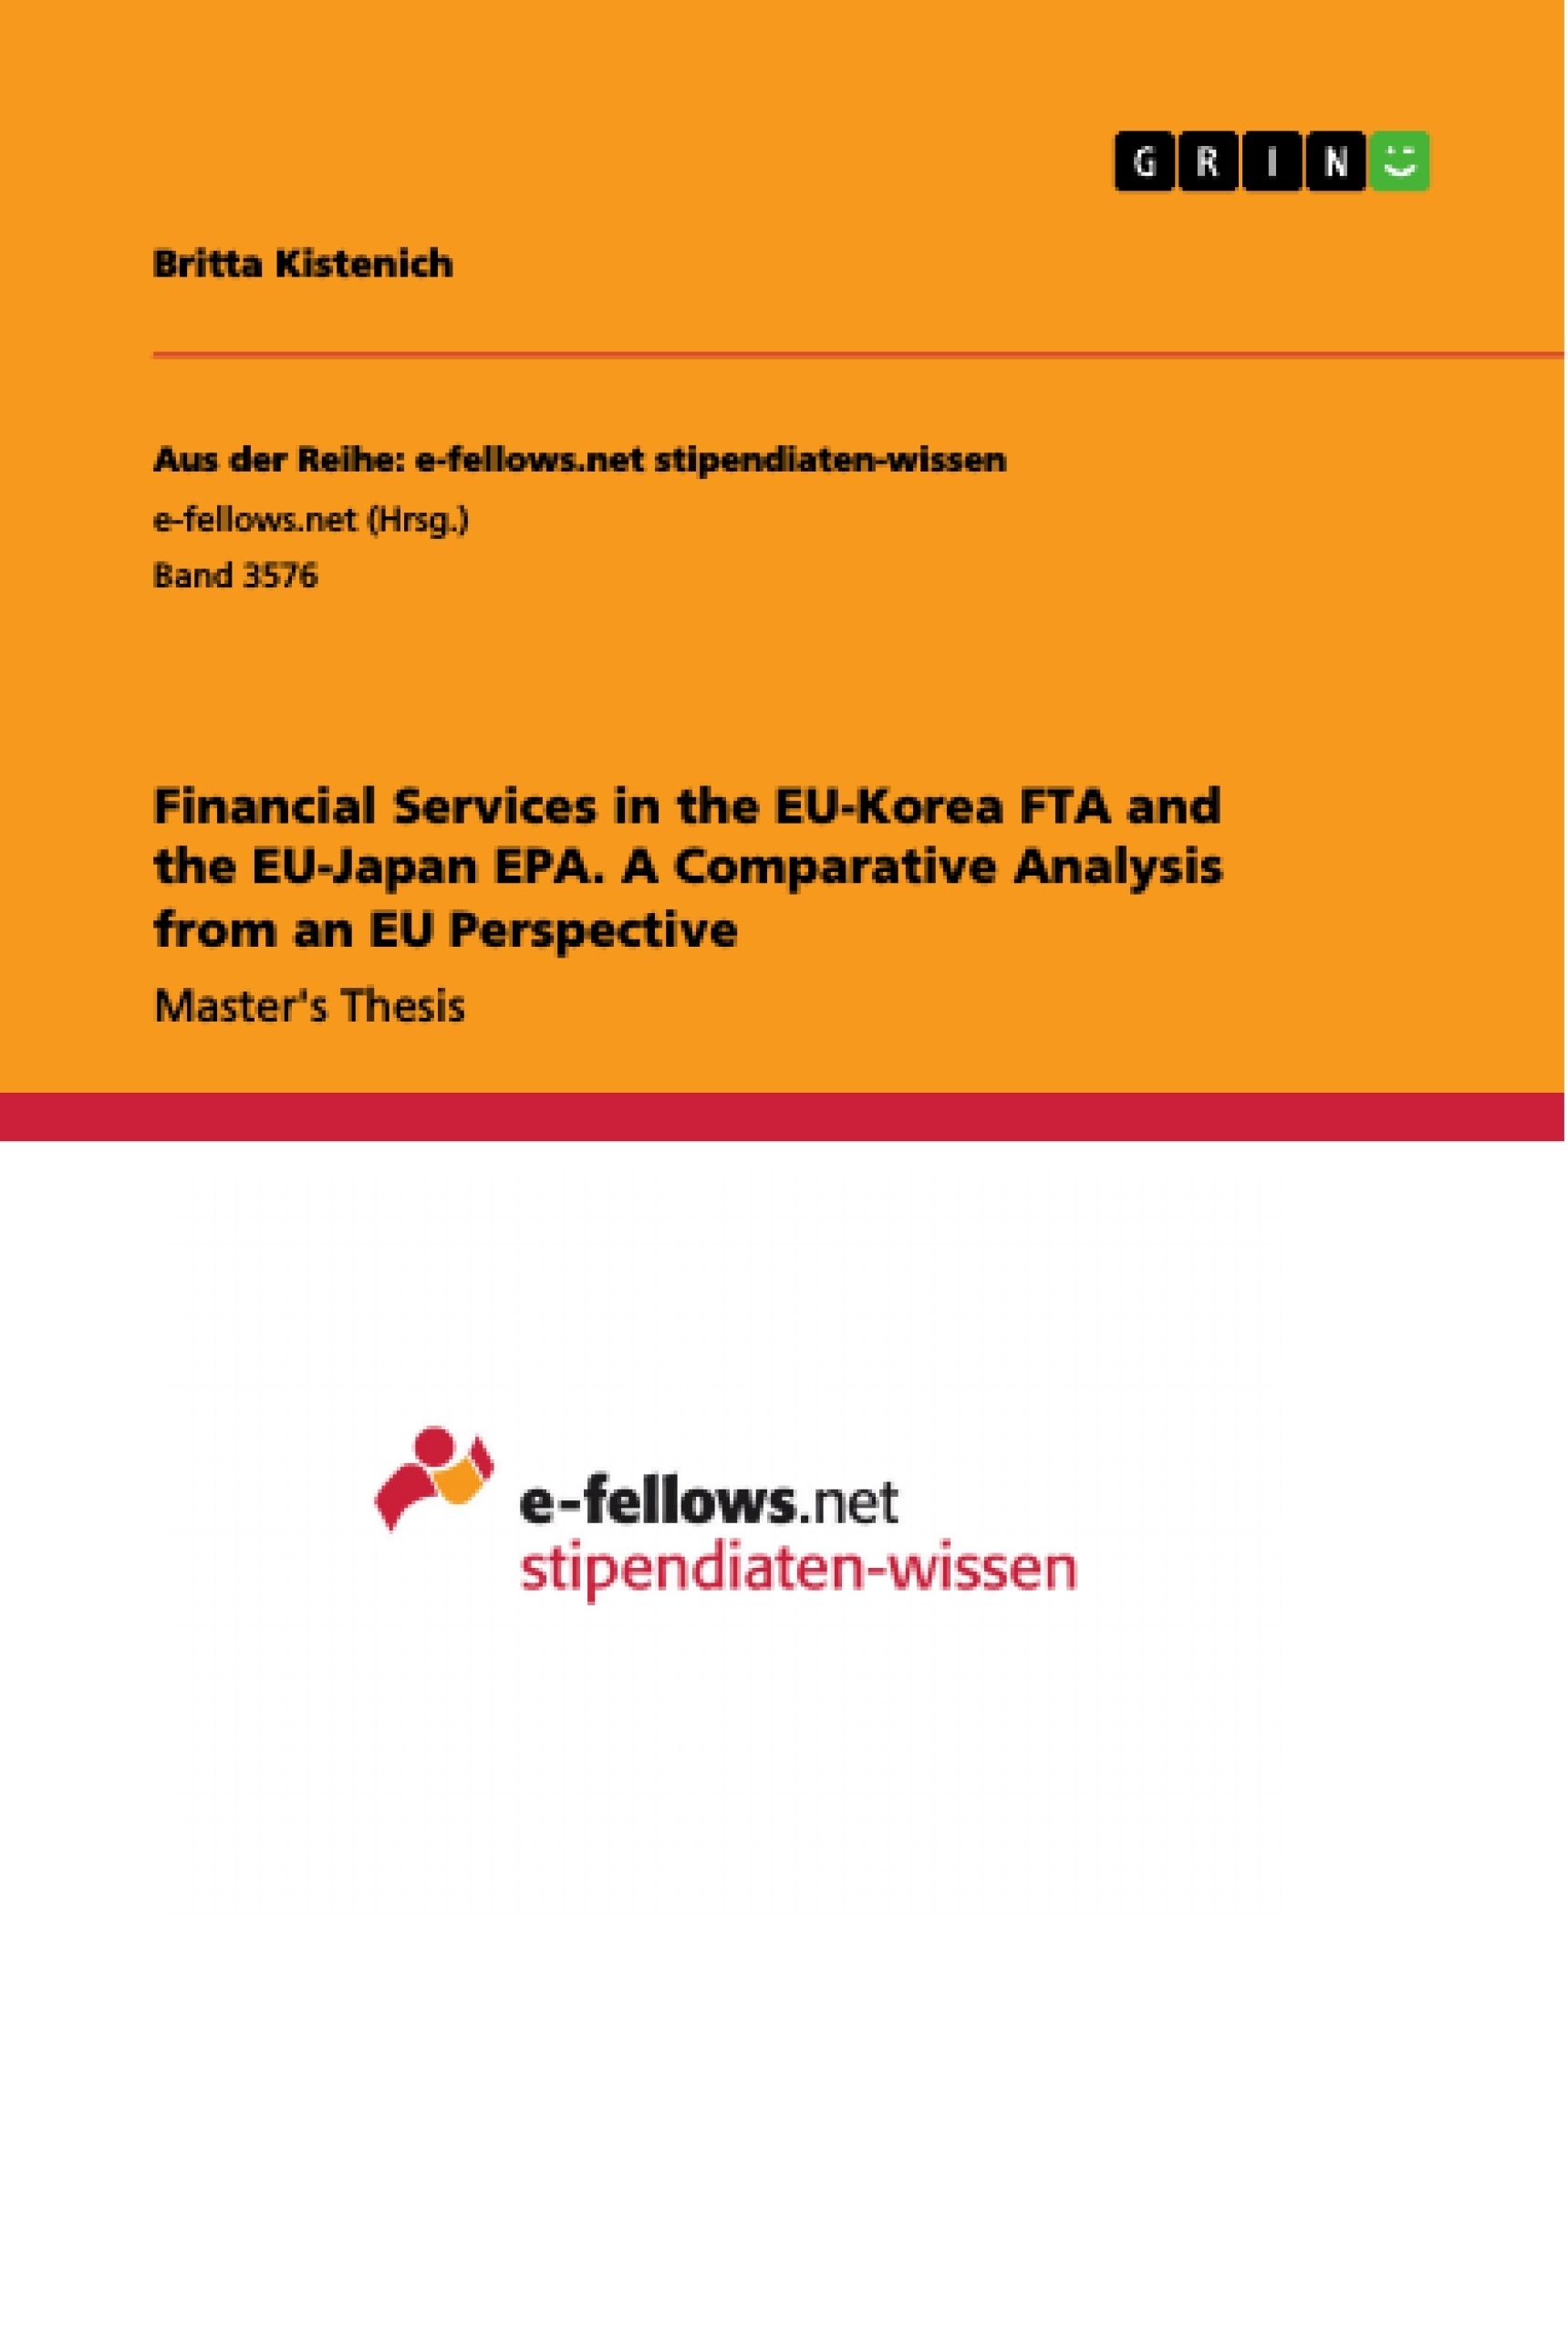 Title: Financial Services in the EU-Korea FTA and the EU-Japan EPA. A Comparative Analysis from an EU Perspective